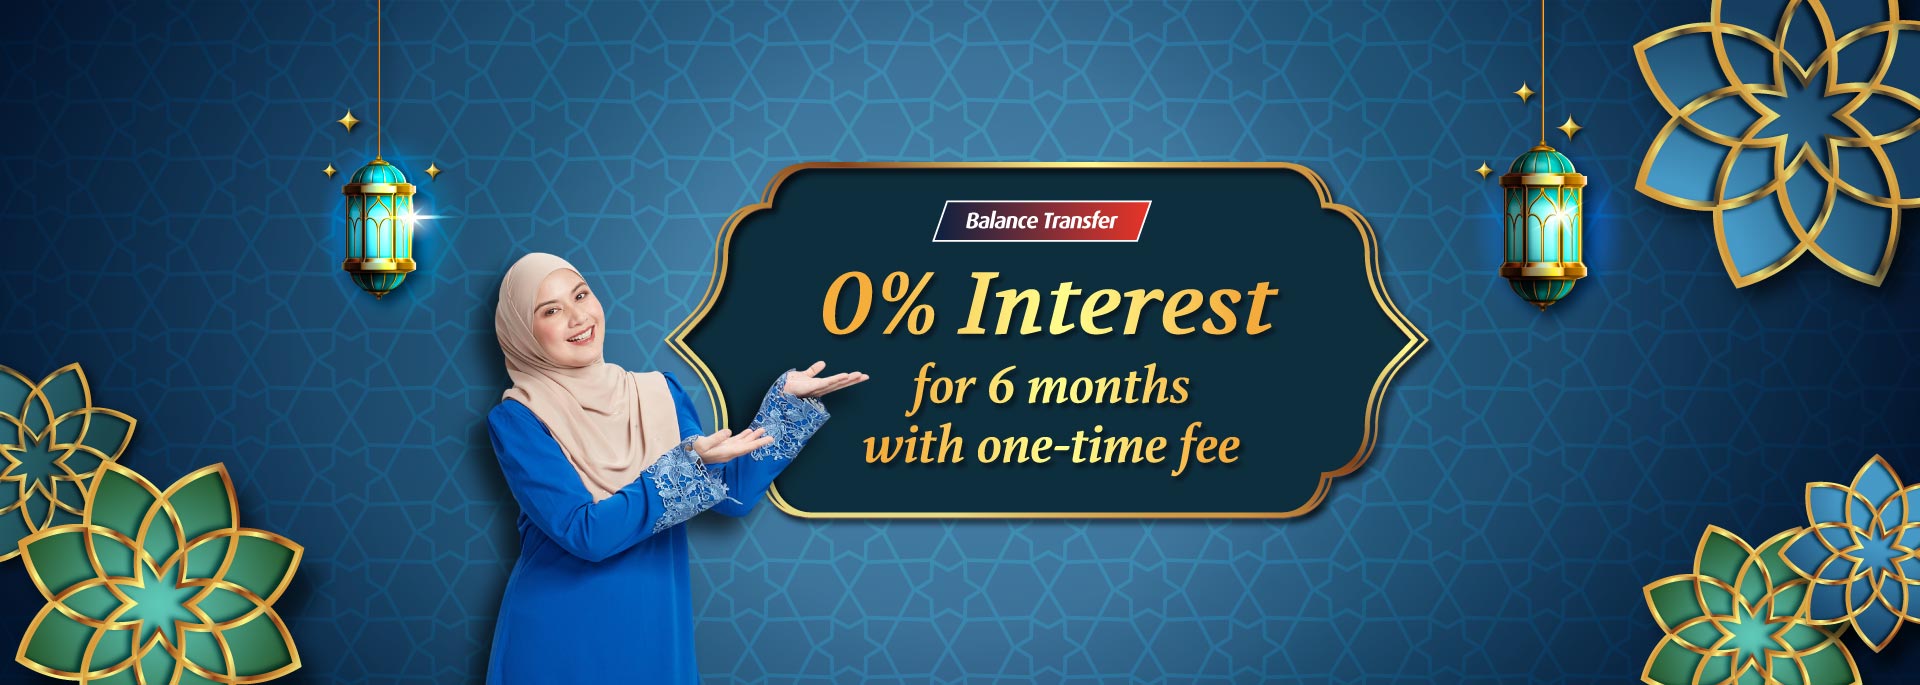 Balance Transfer 0% Interest for 6 months with one-time fee